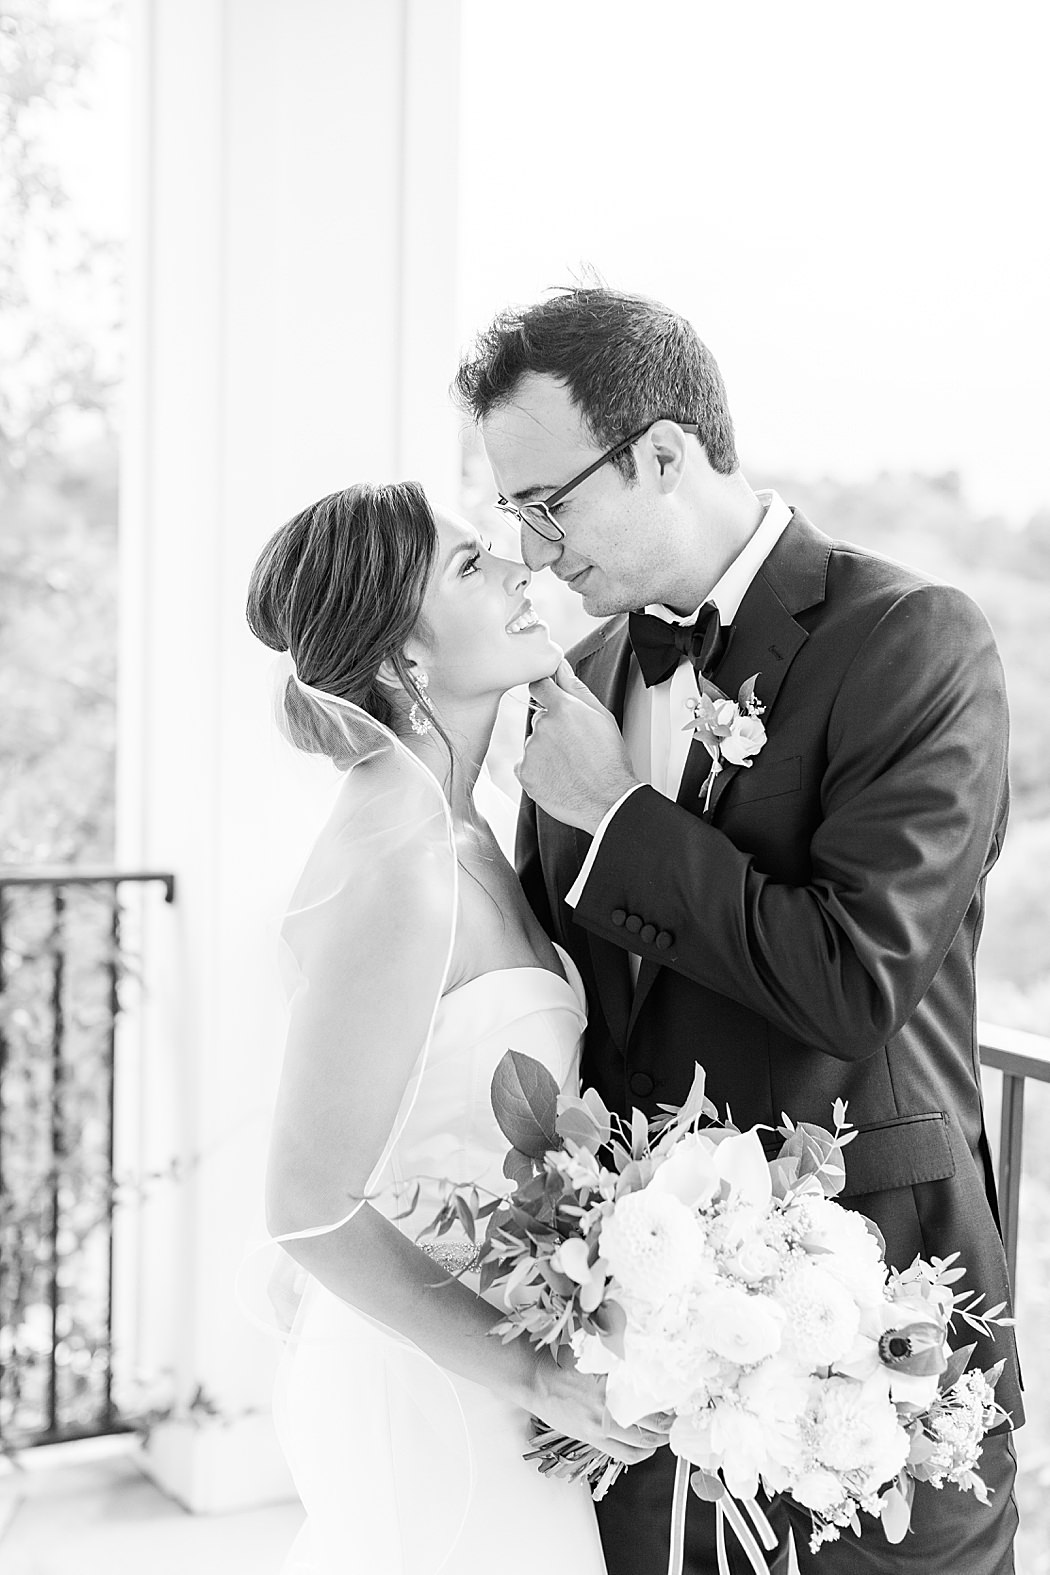 A Black and White Summer wedding at Kendall Point venue in Boerne Texas 0052